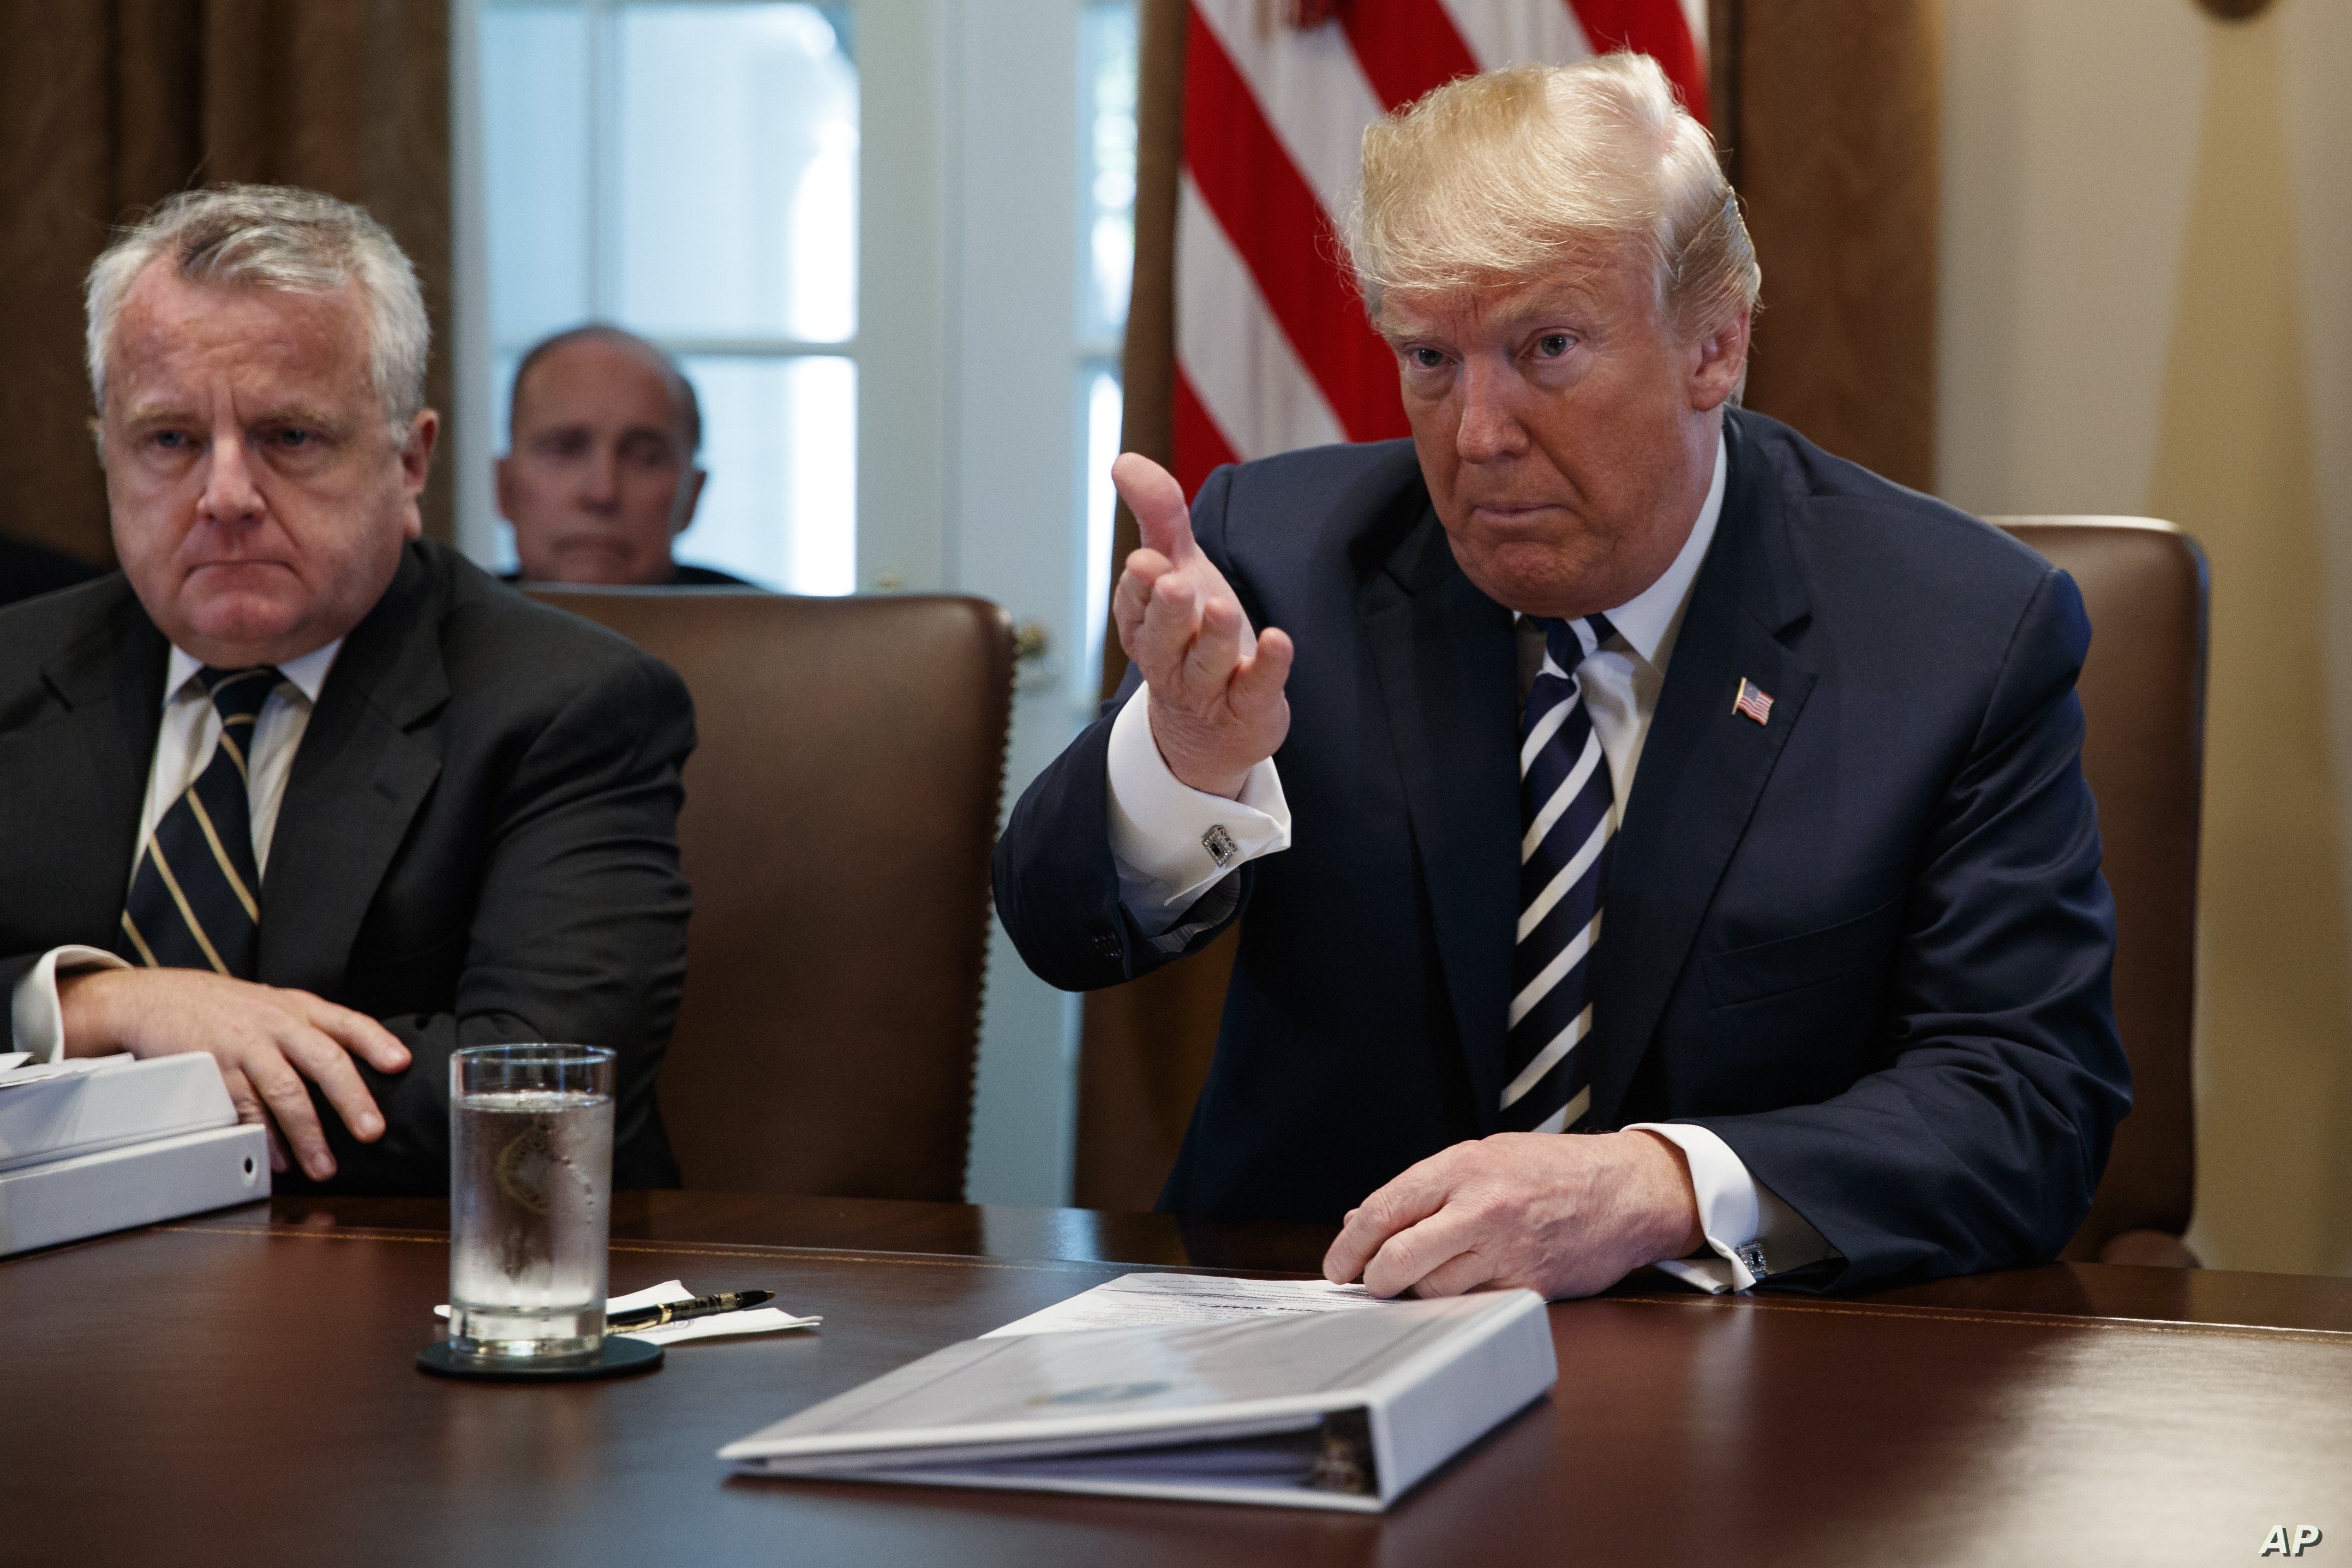 Deputy Secretary of State John Sullivan listens to President Donald Trump speak during a cabinet meeting at the White House, May 9, 2018, in Washington.